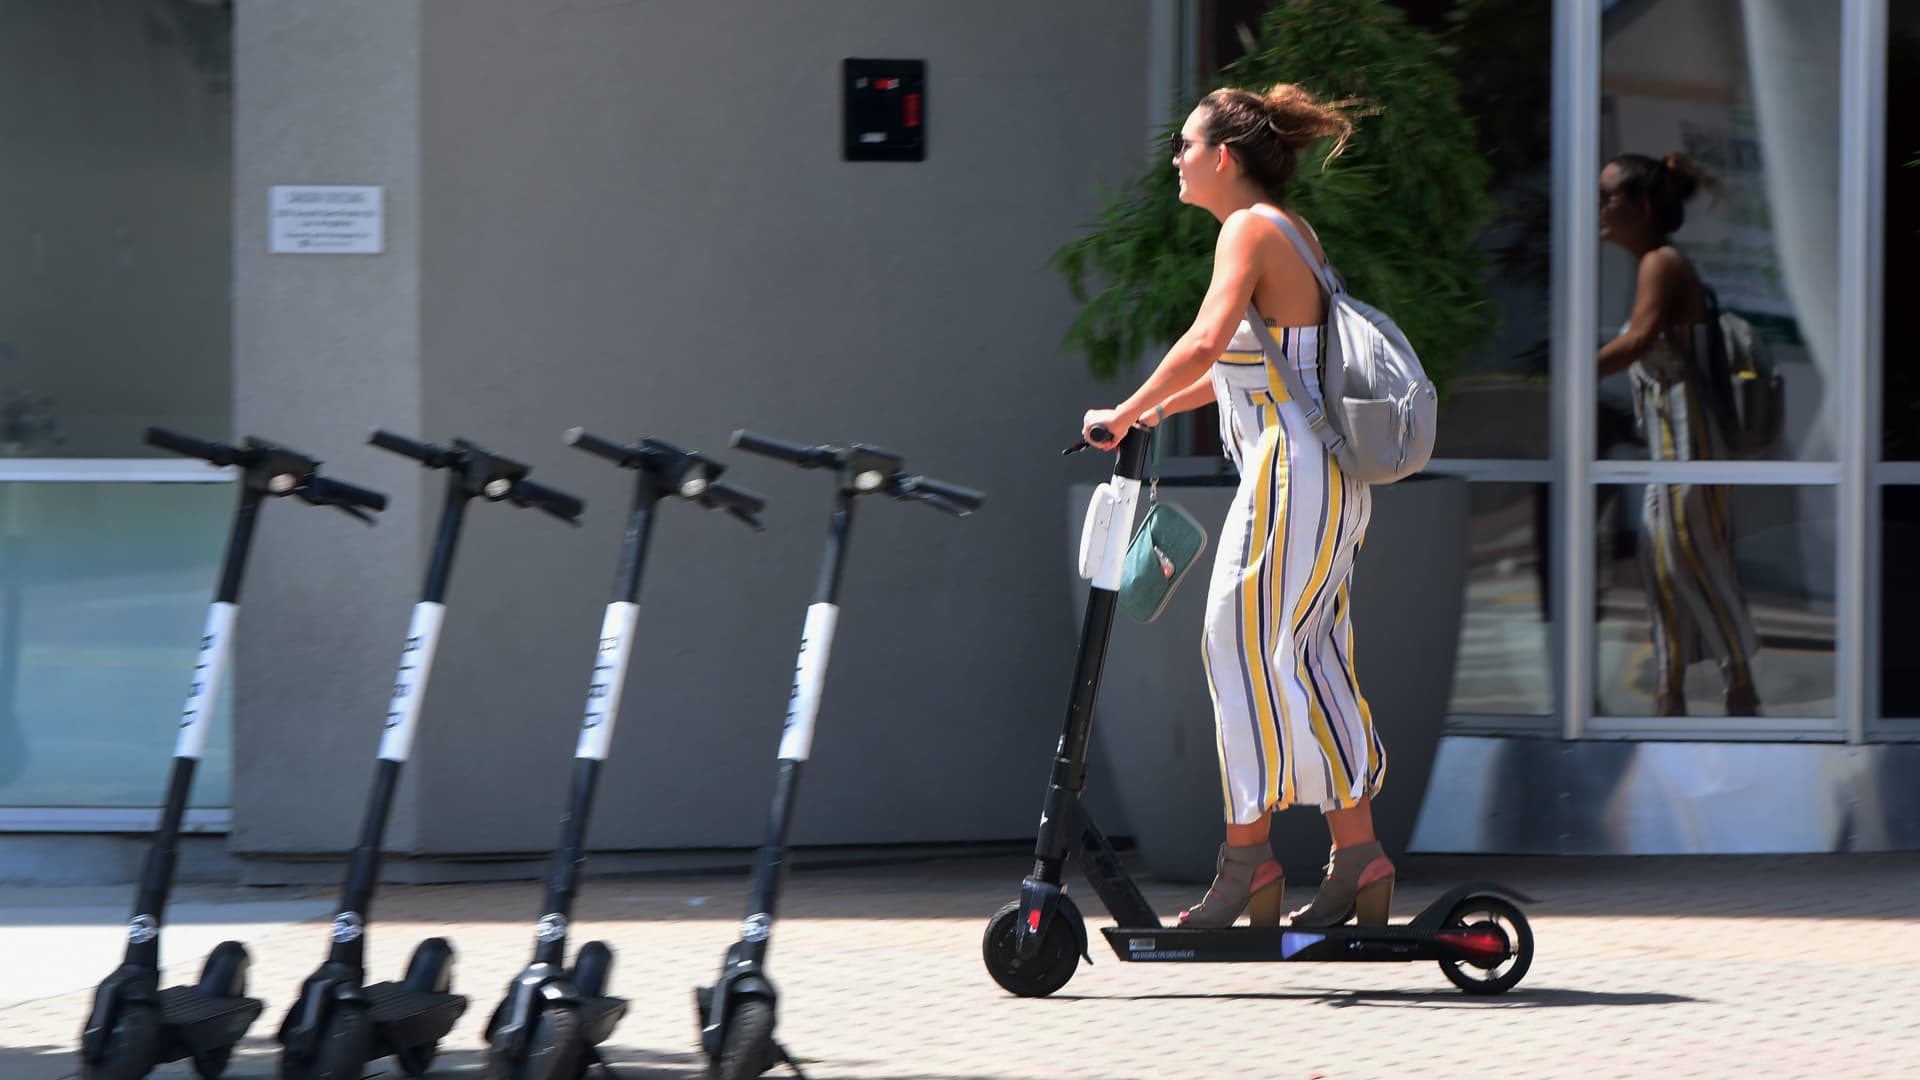 Why cities continue to have a love-hate affair with e-scooters